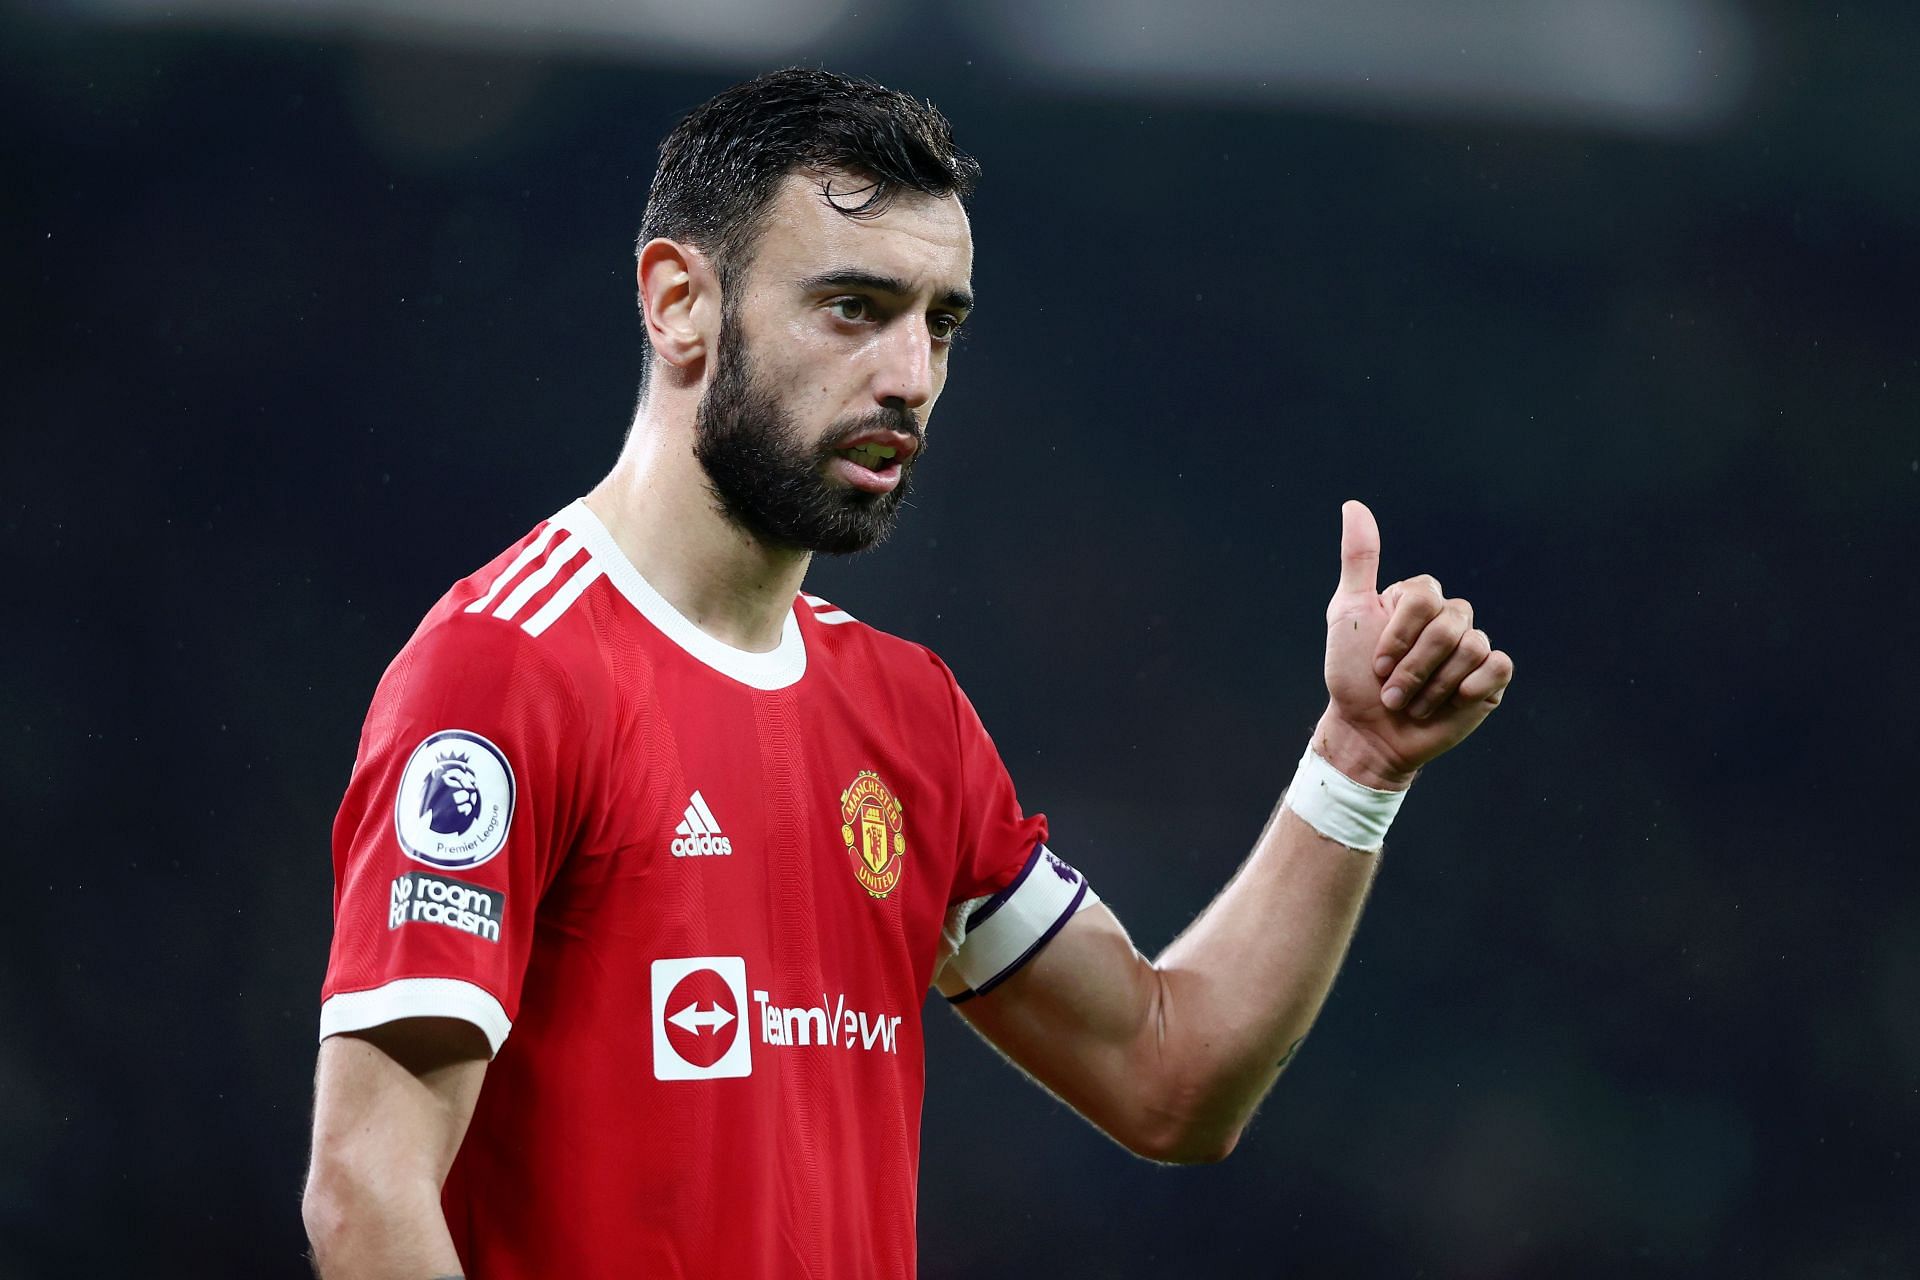 Bruno Fernandes has been backed to become the next captain at Old Trafford.